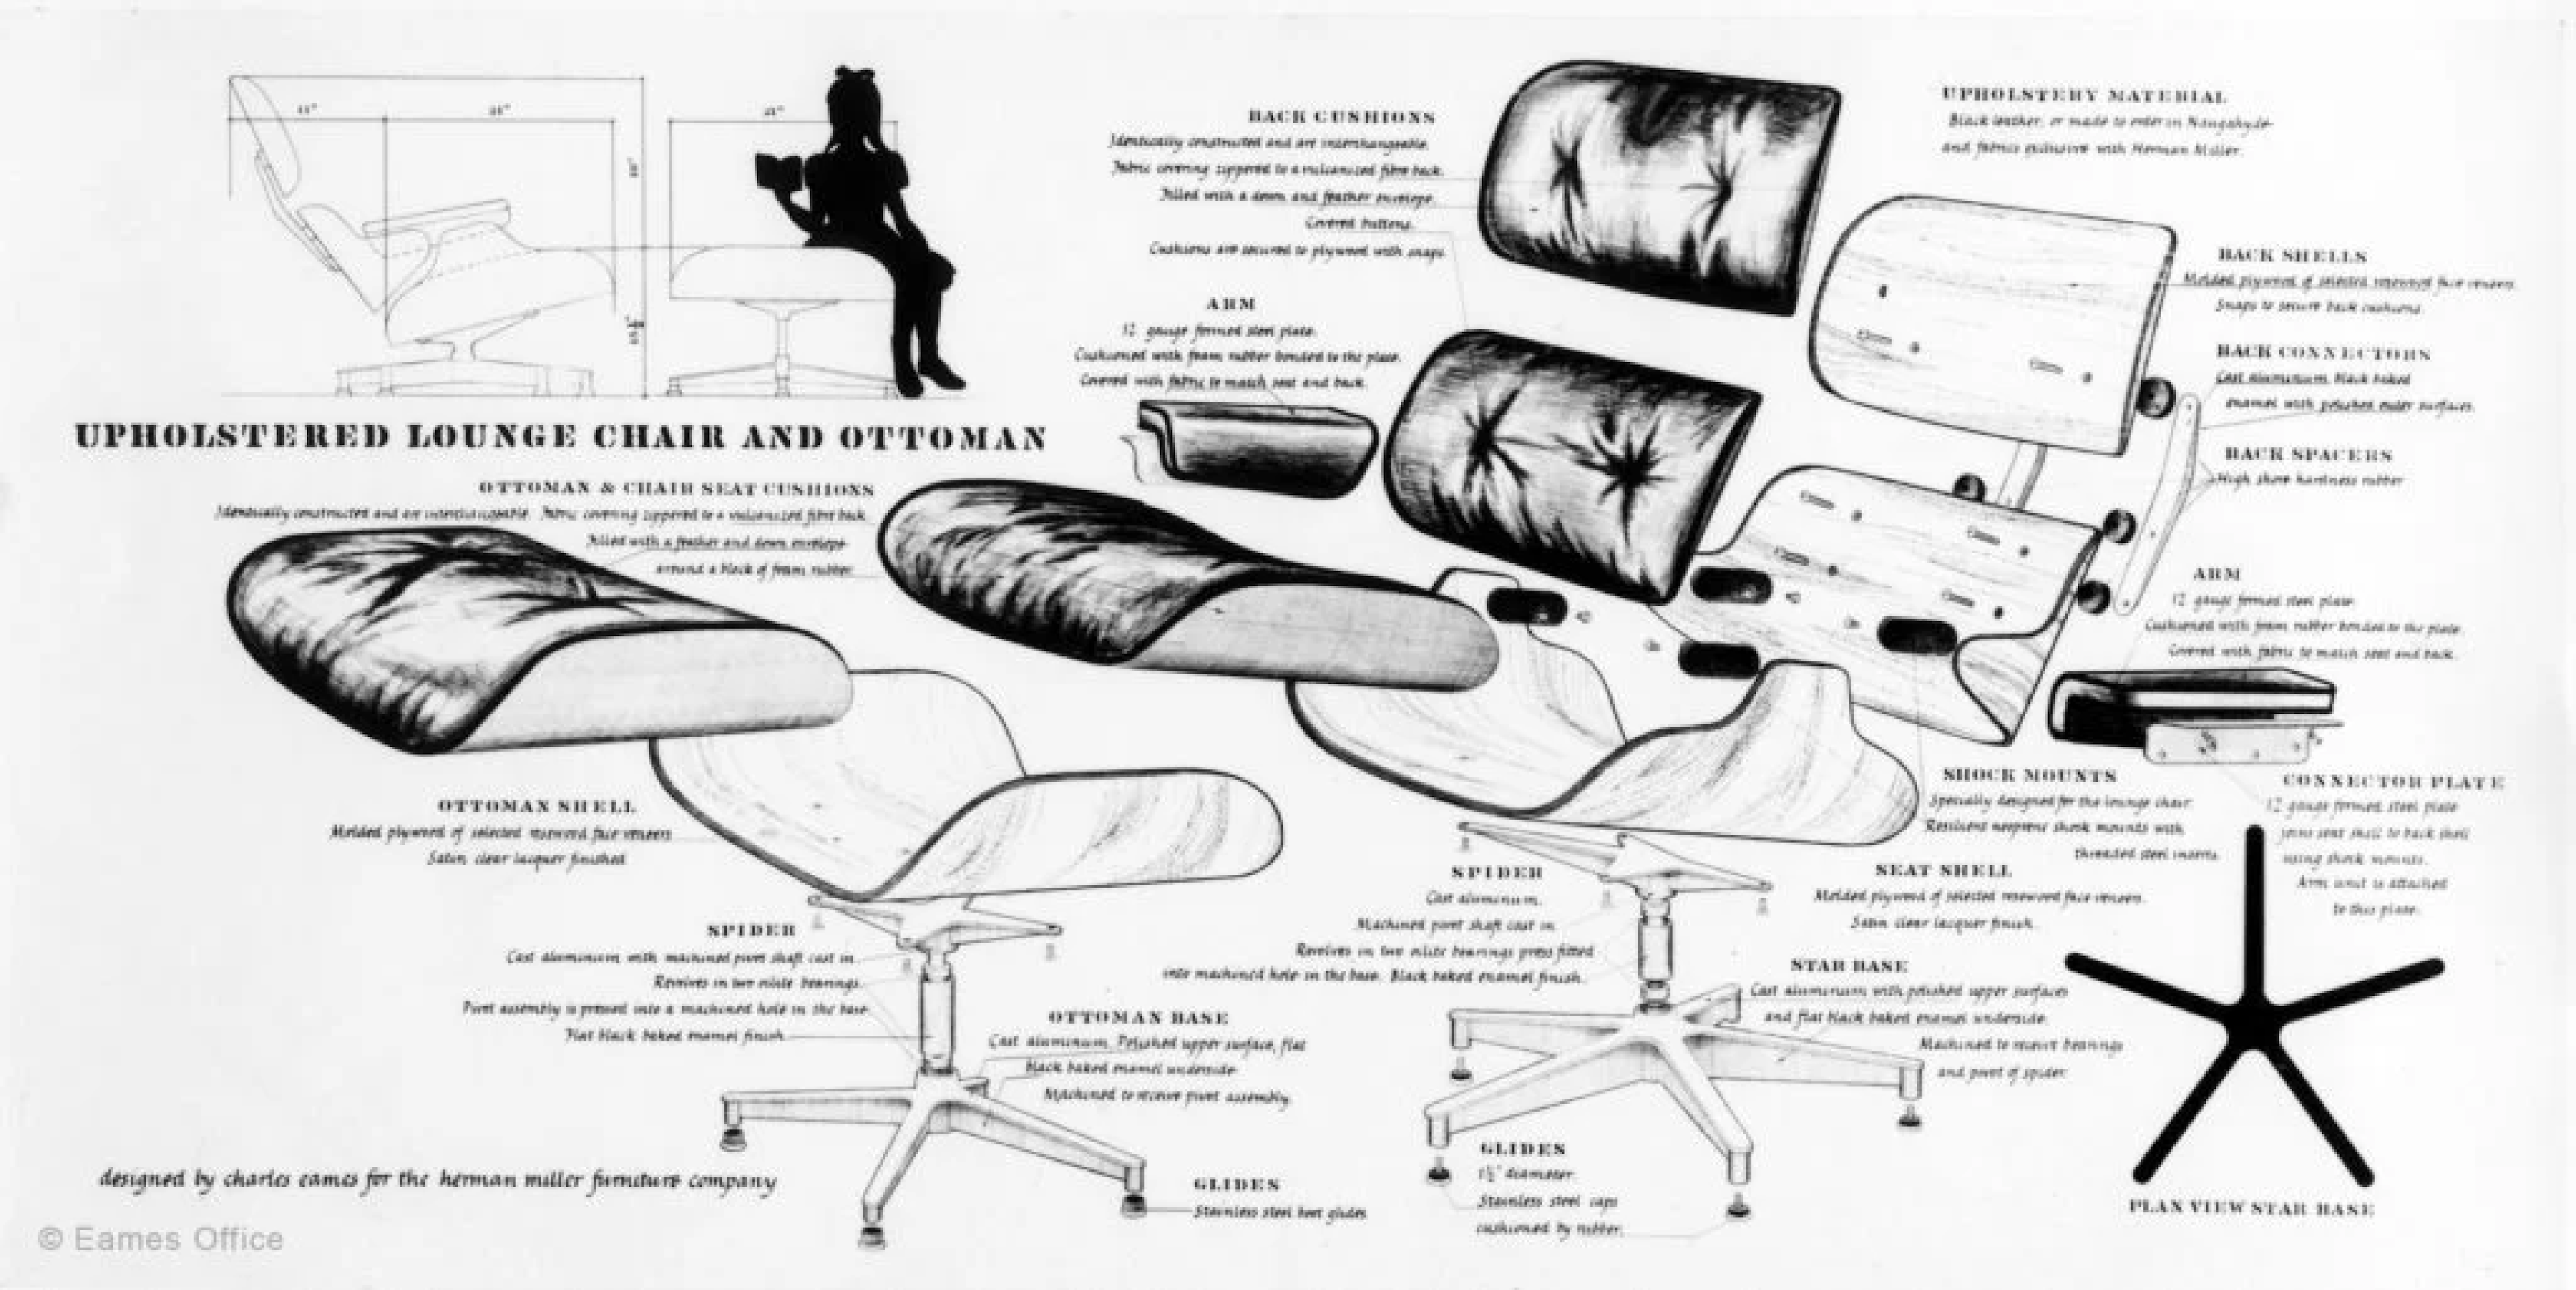 Oude ad van Eames Lounge Chair